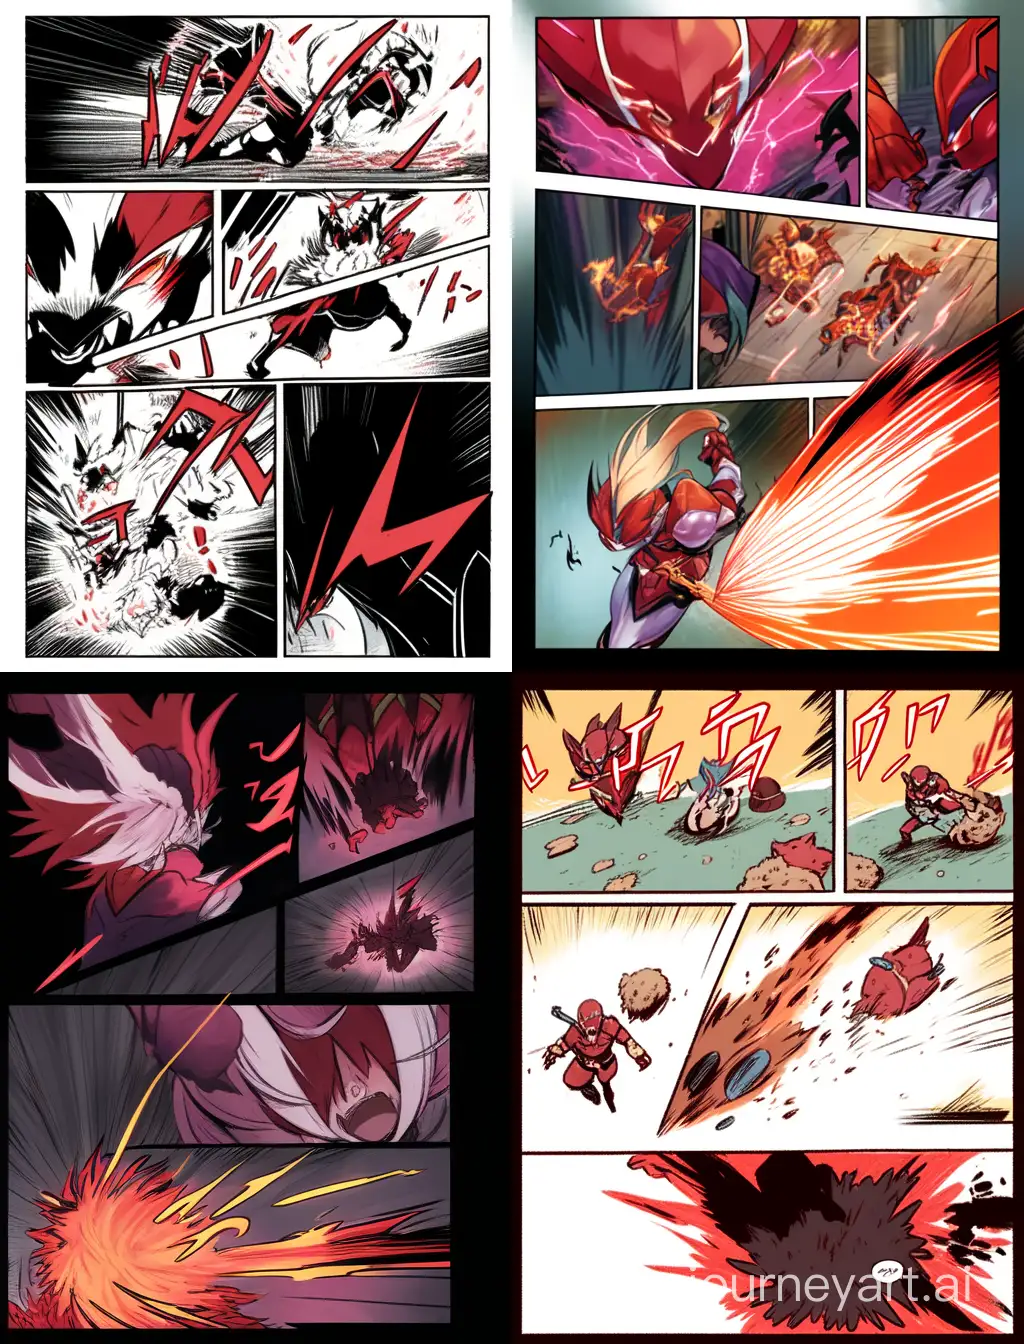 Dynamic-Action-Playful-Red-Kitten-Unleashes-Chaos-in-Comic-Book-Adventure